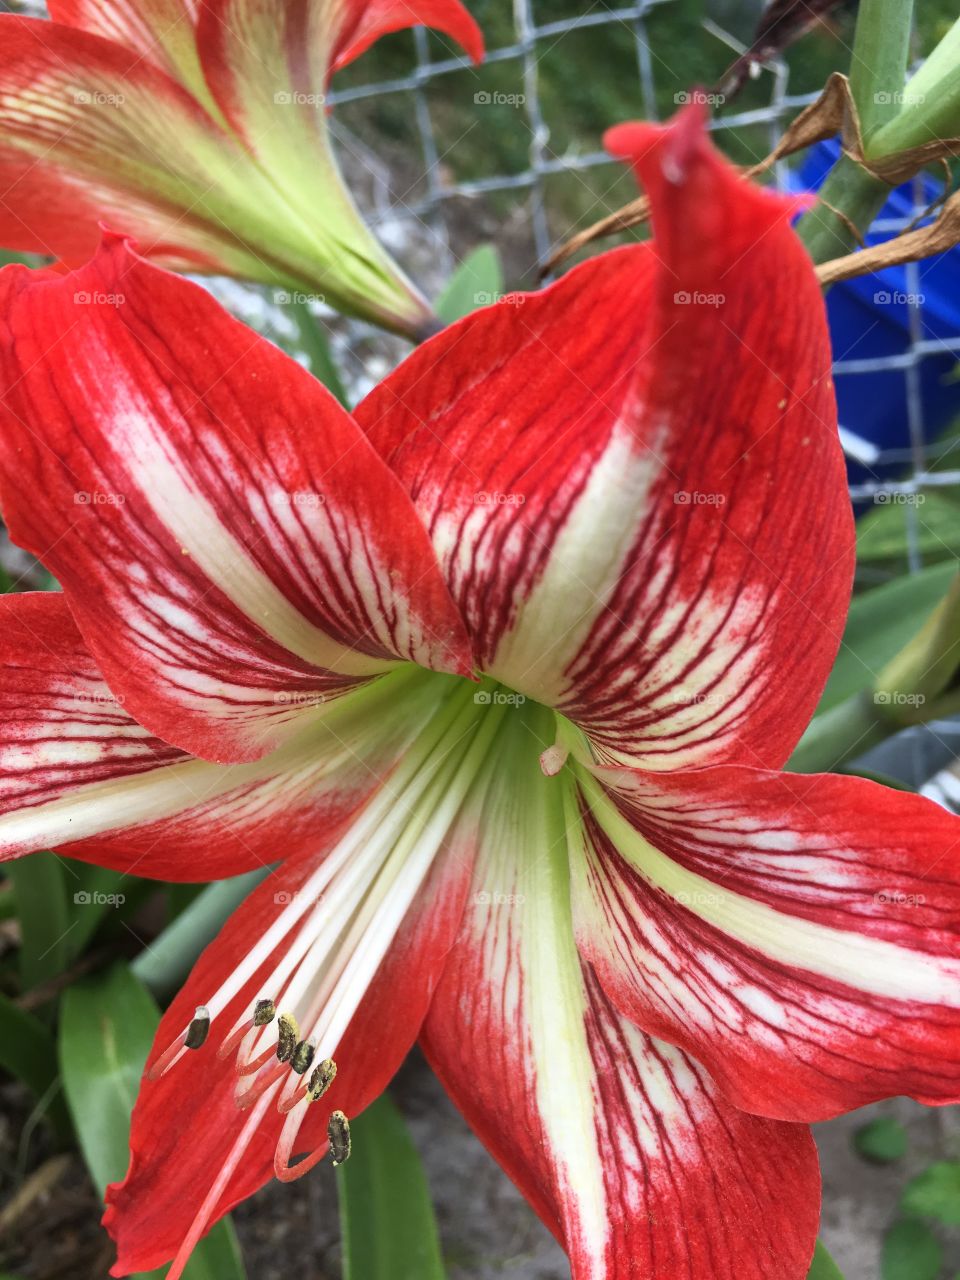 Bulb blooms with red flower